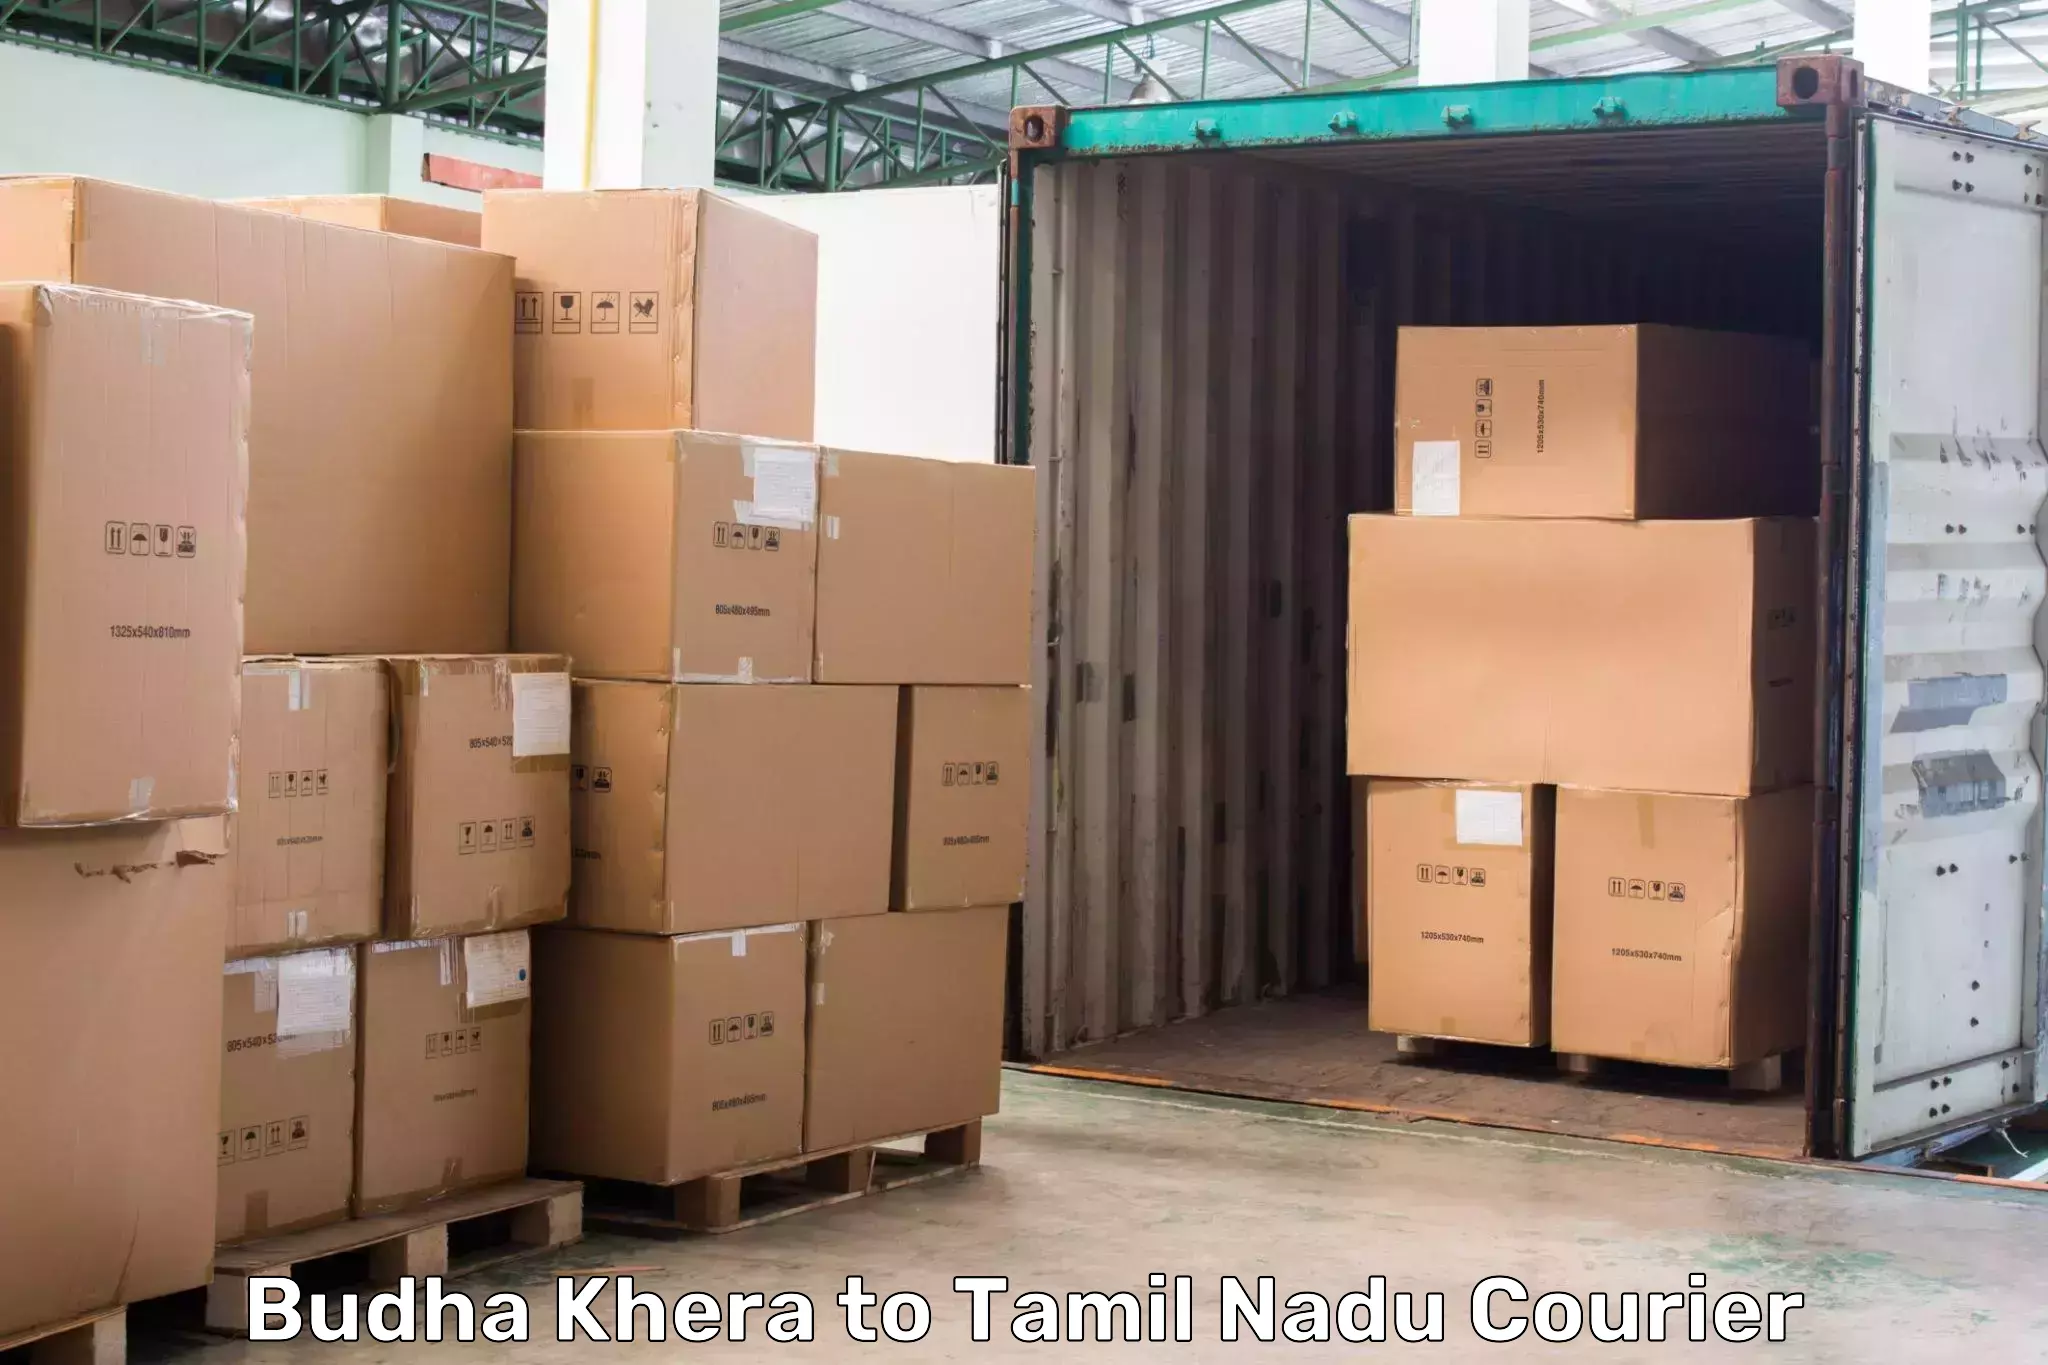 Seamless shipping experience in Budha Khera to SRM Institute of Science and Technology Chennai